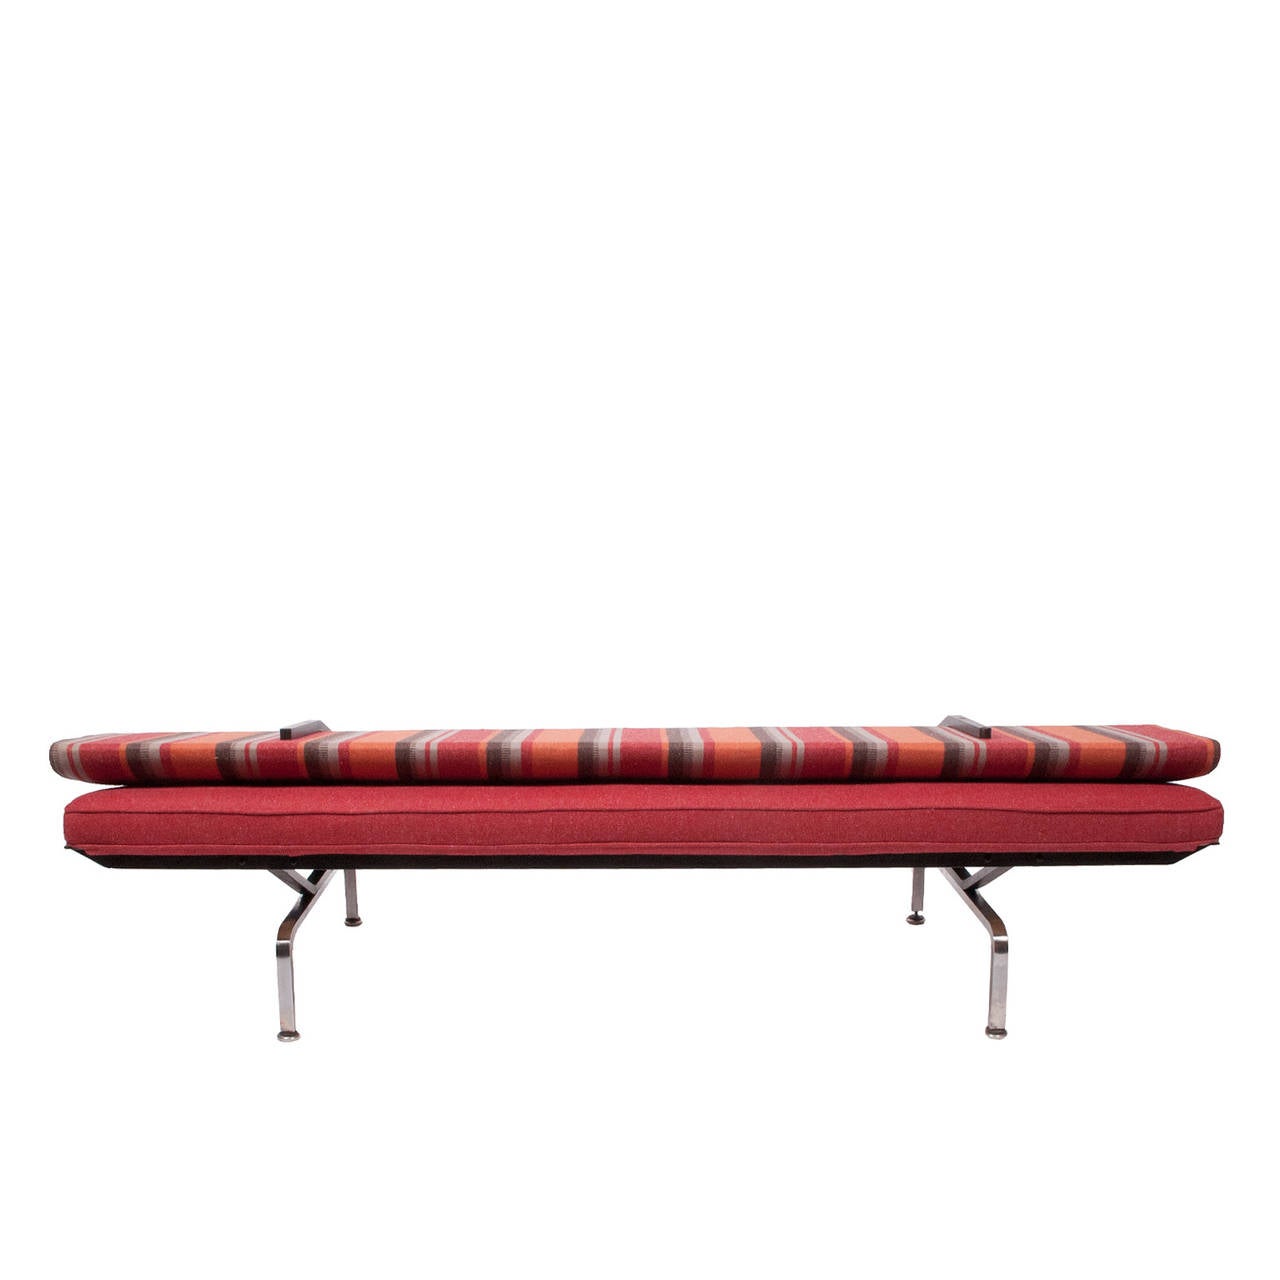 Mid-20th Century Compact Sofa by Charles Eames